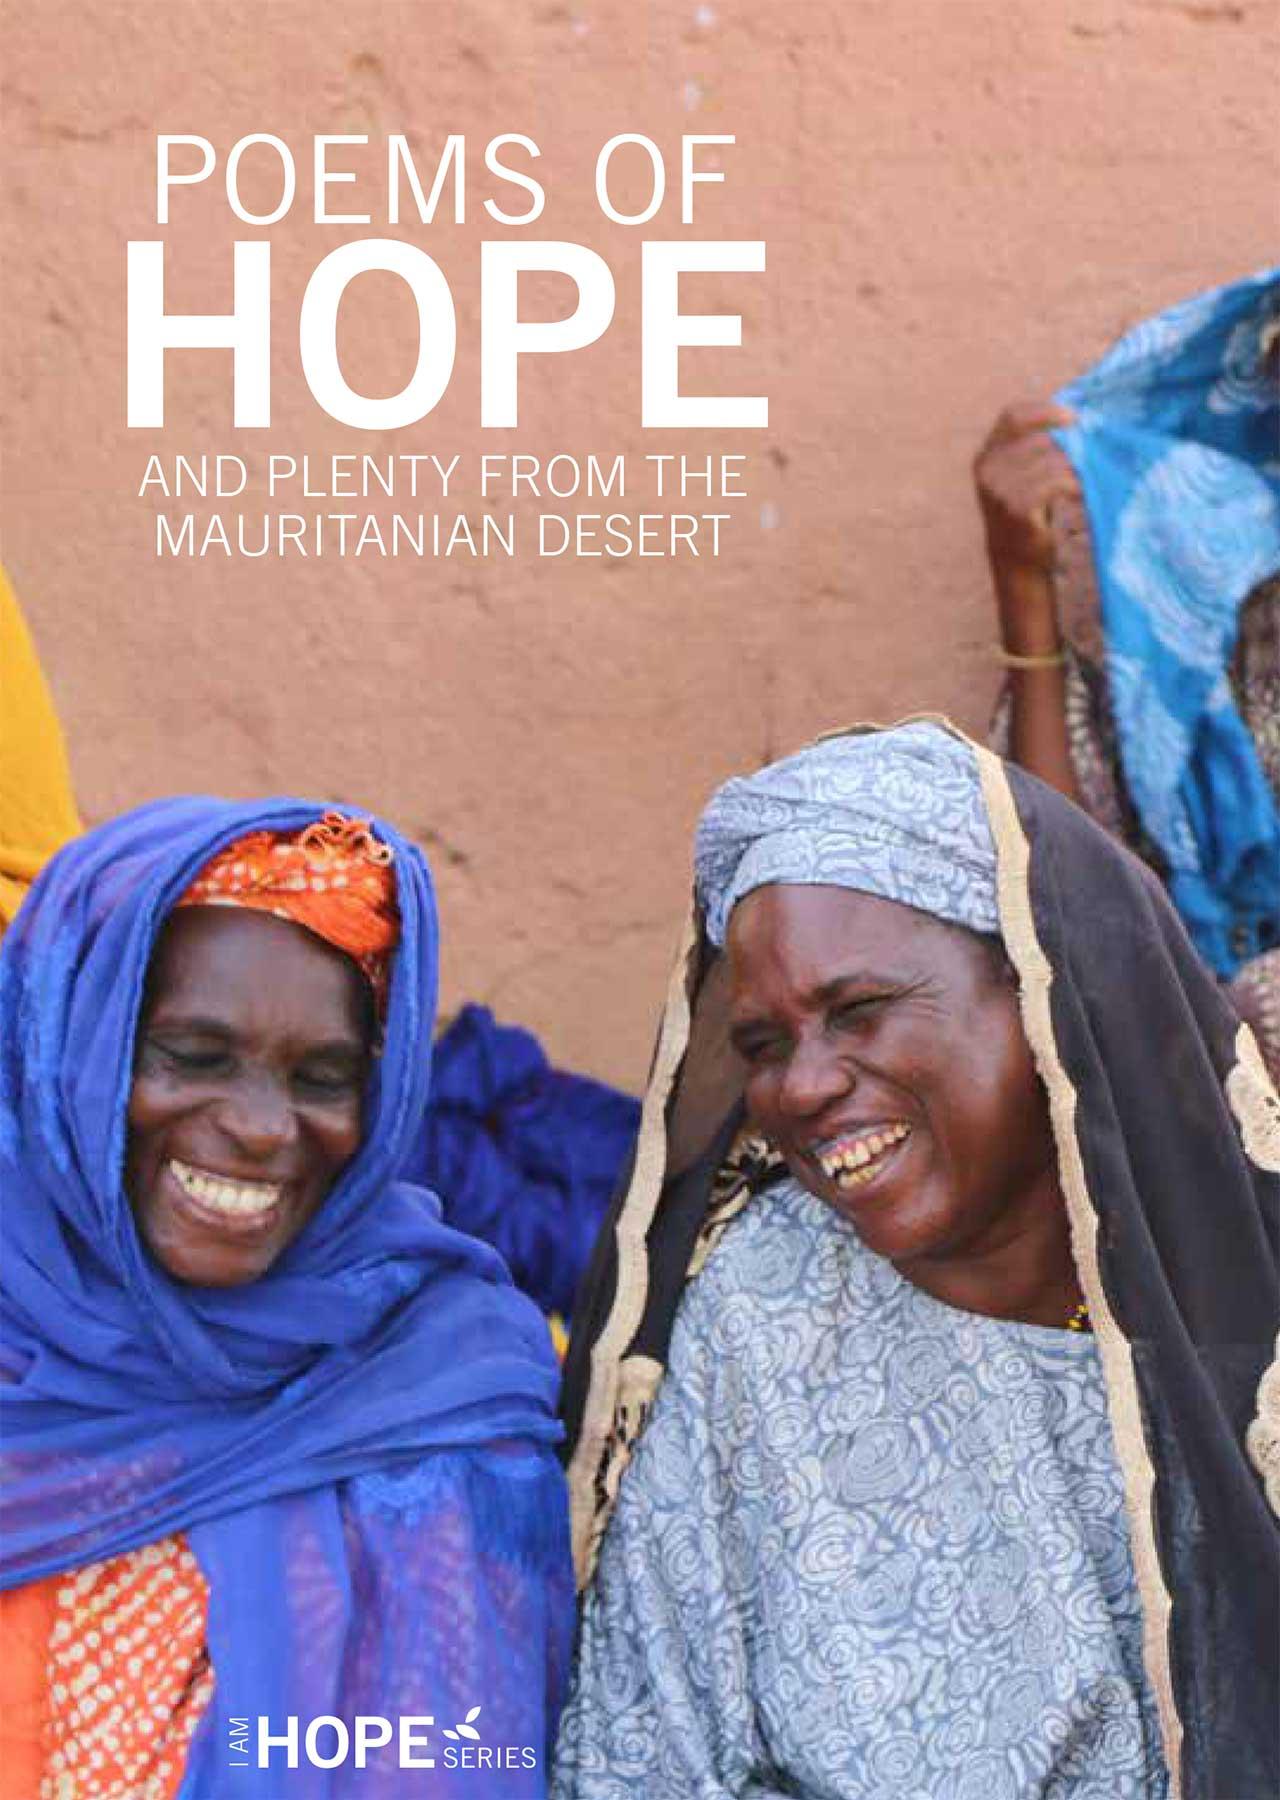 Poems of hope and plenty from the Mauritanian desert